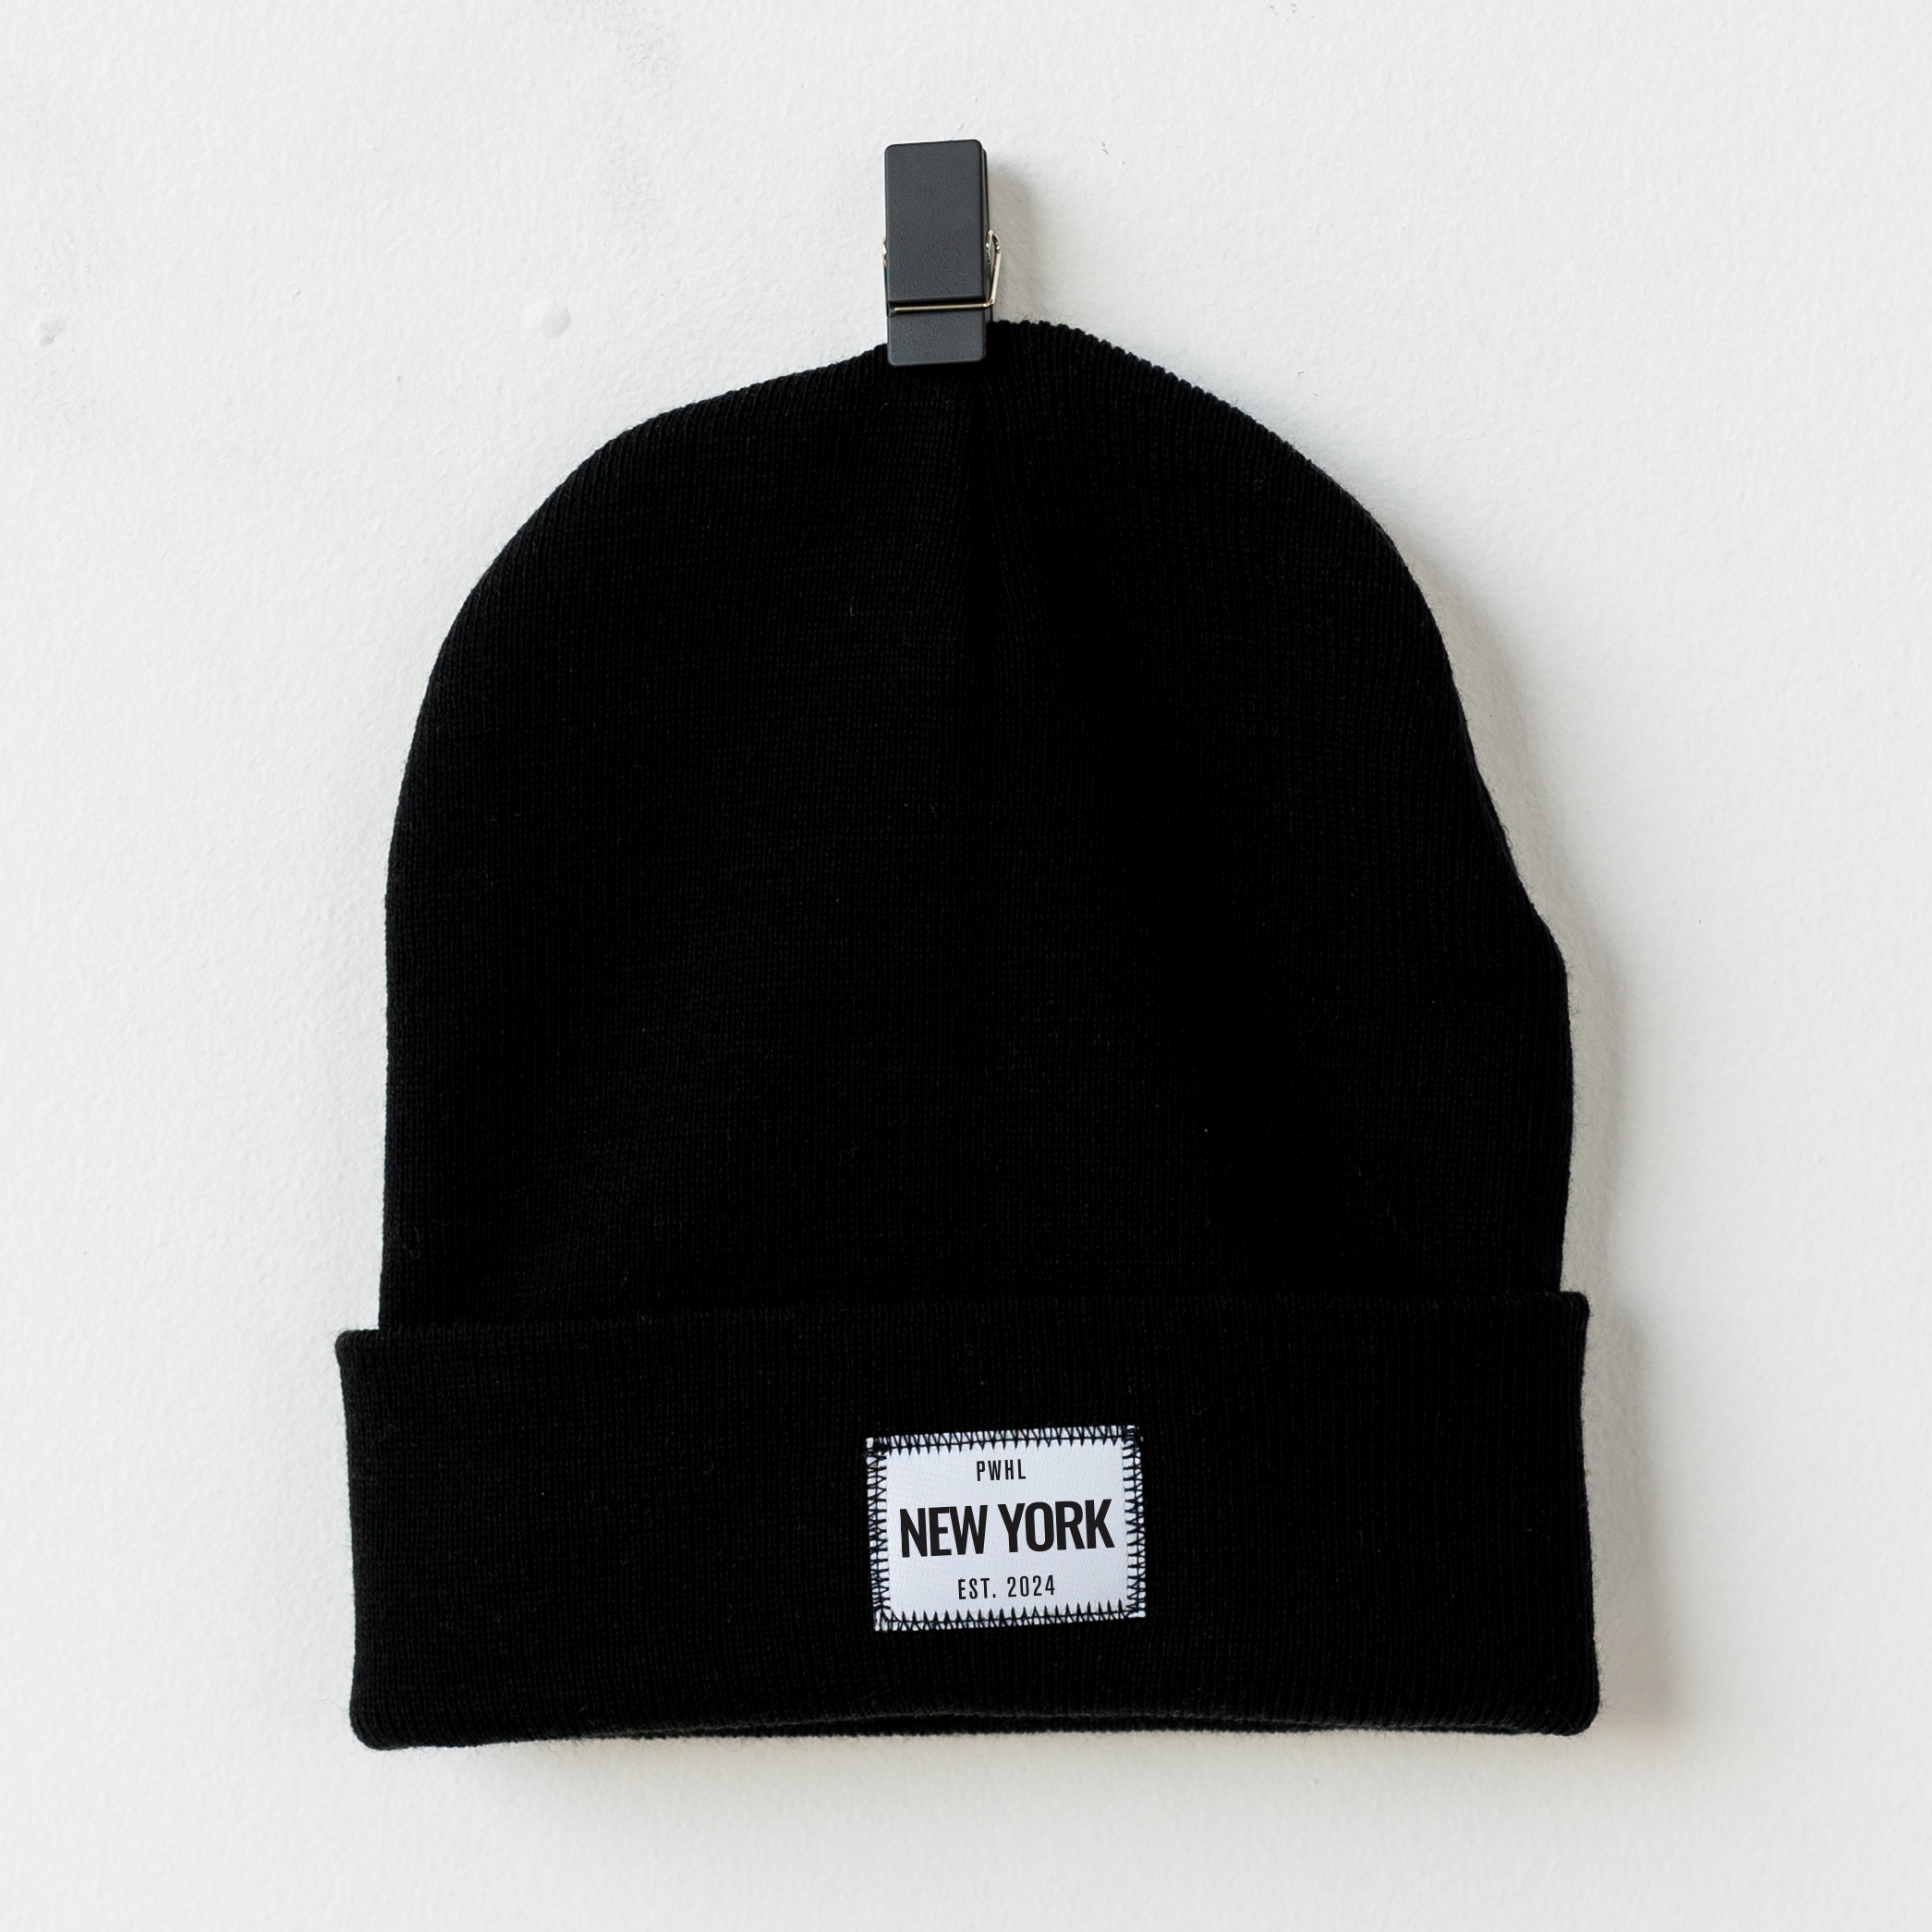 The York New – Official of PWHL Shop Toque/Beanie the